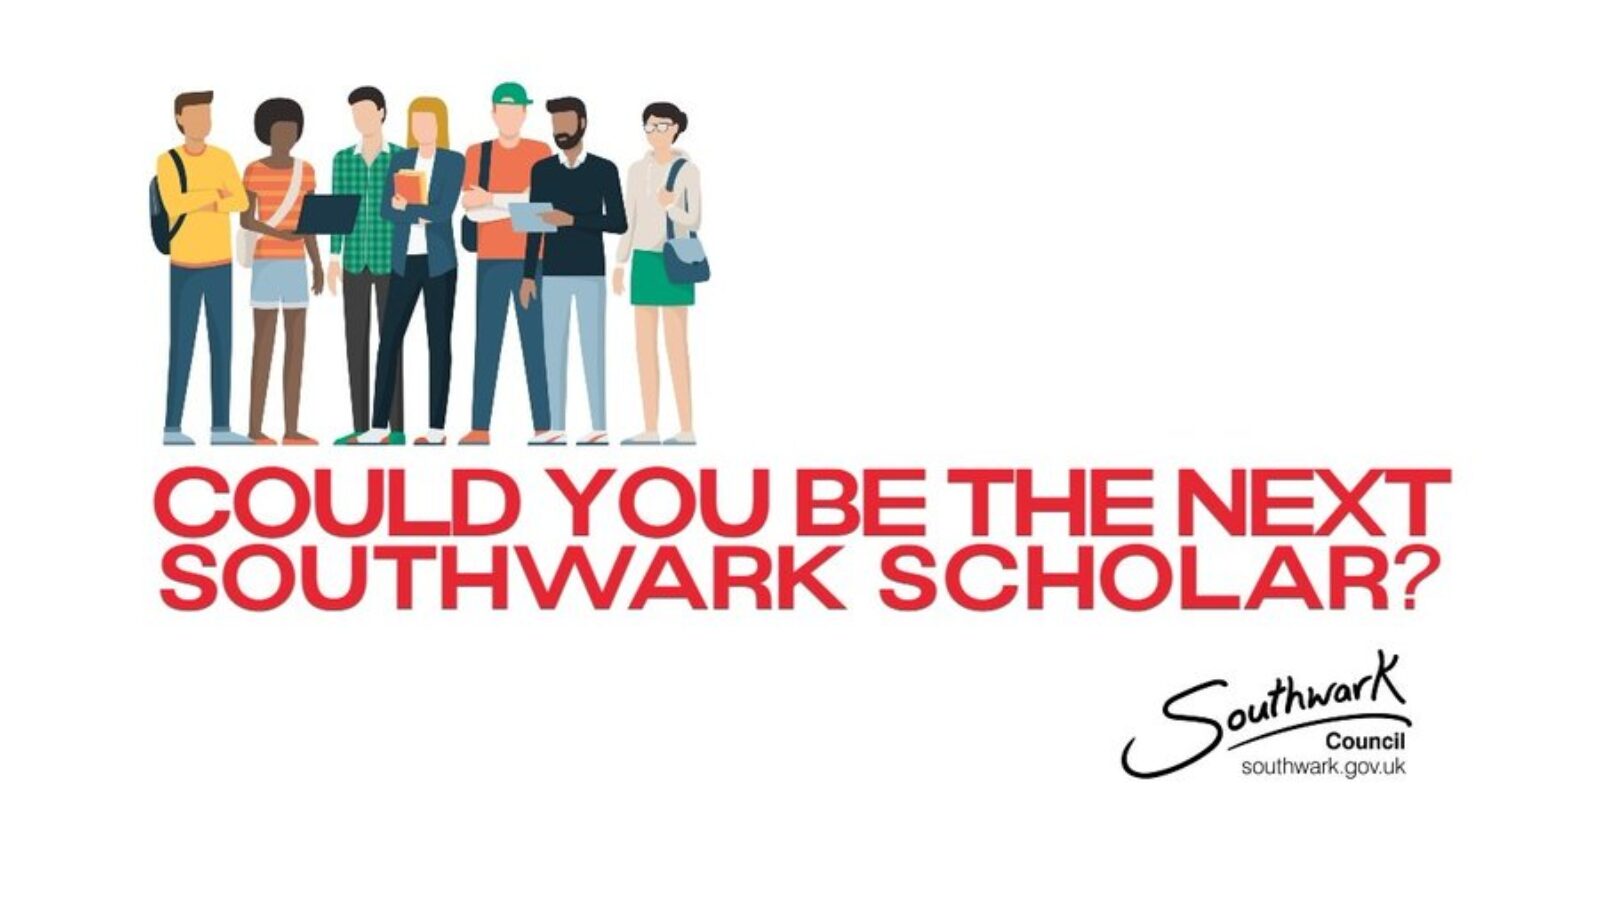 Could you be the next Southwark Scholar